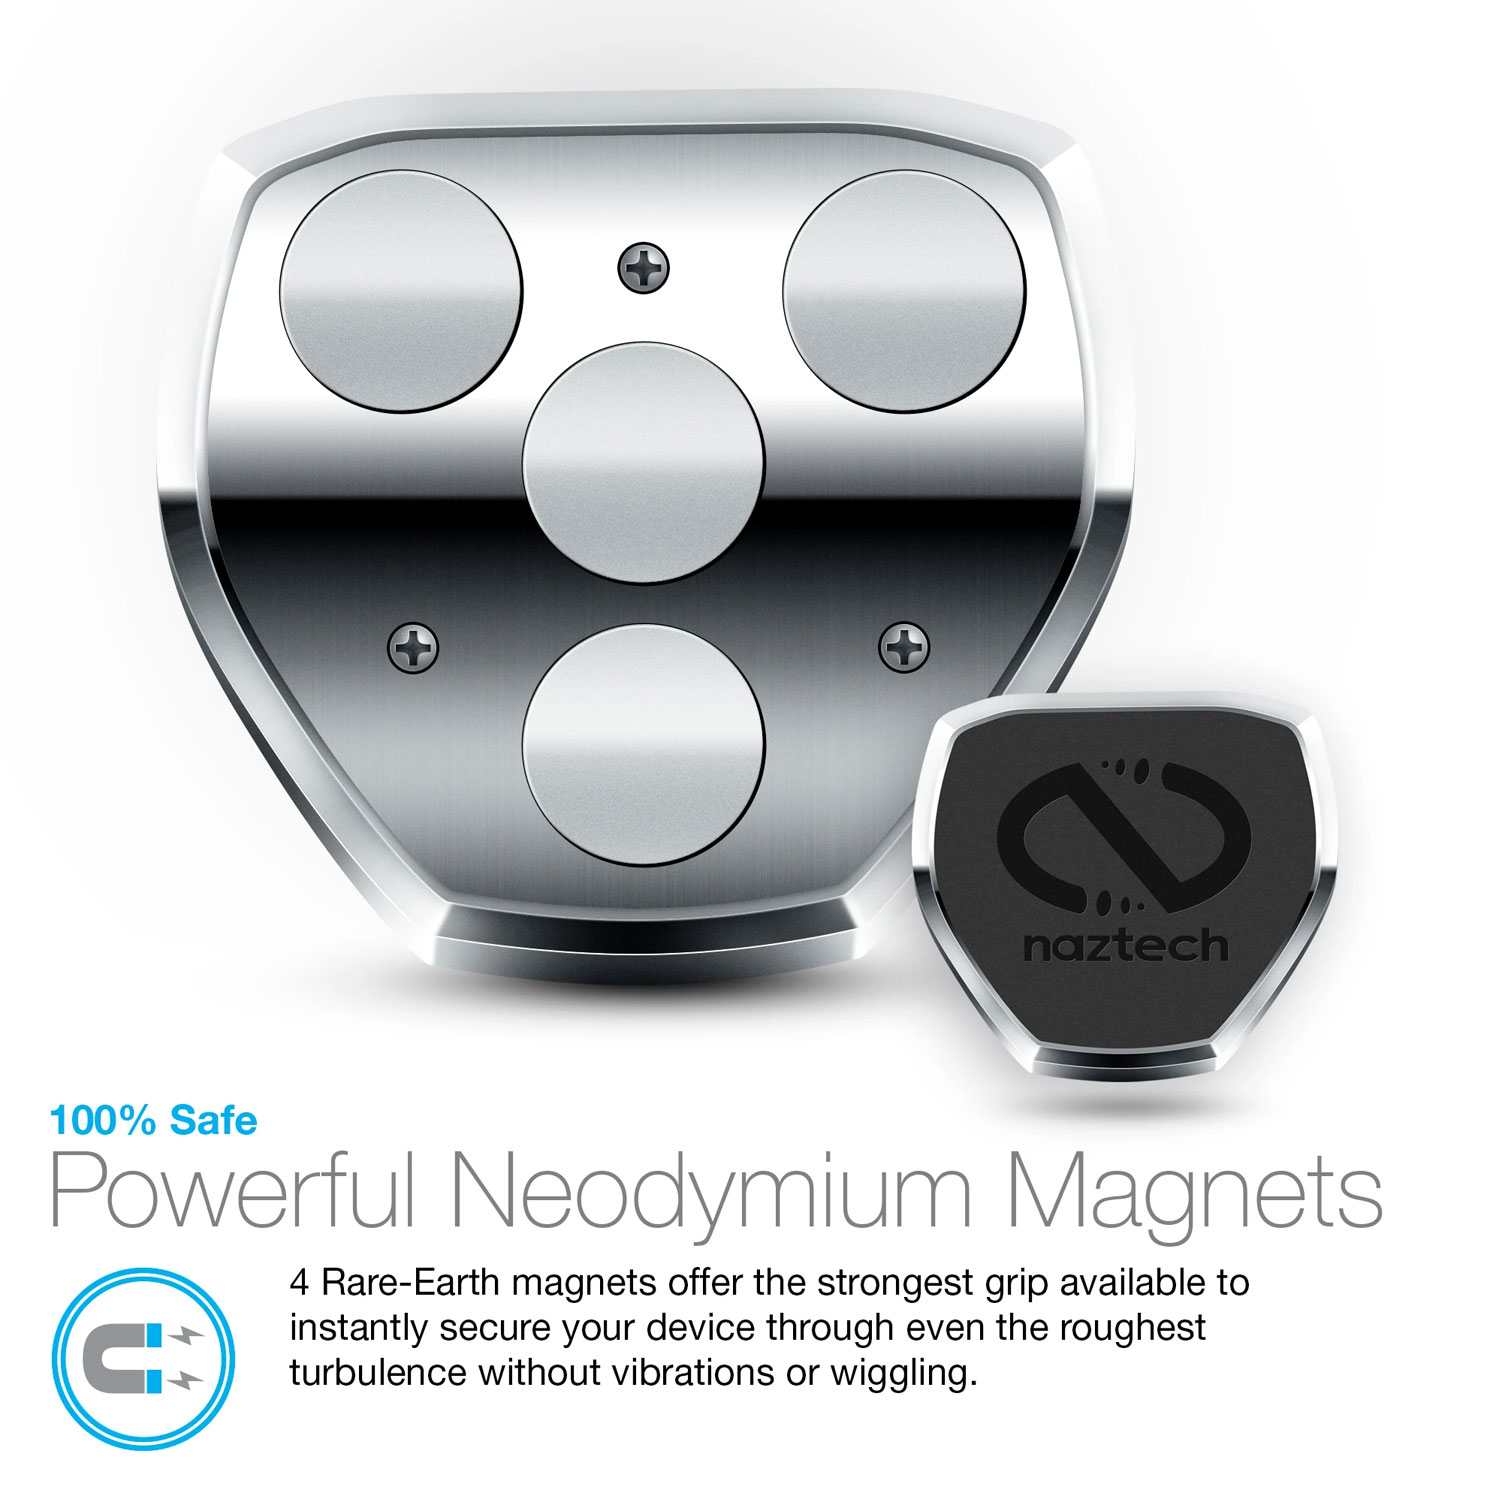 Magnetic Mount Magbuddy In-Flight